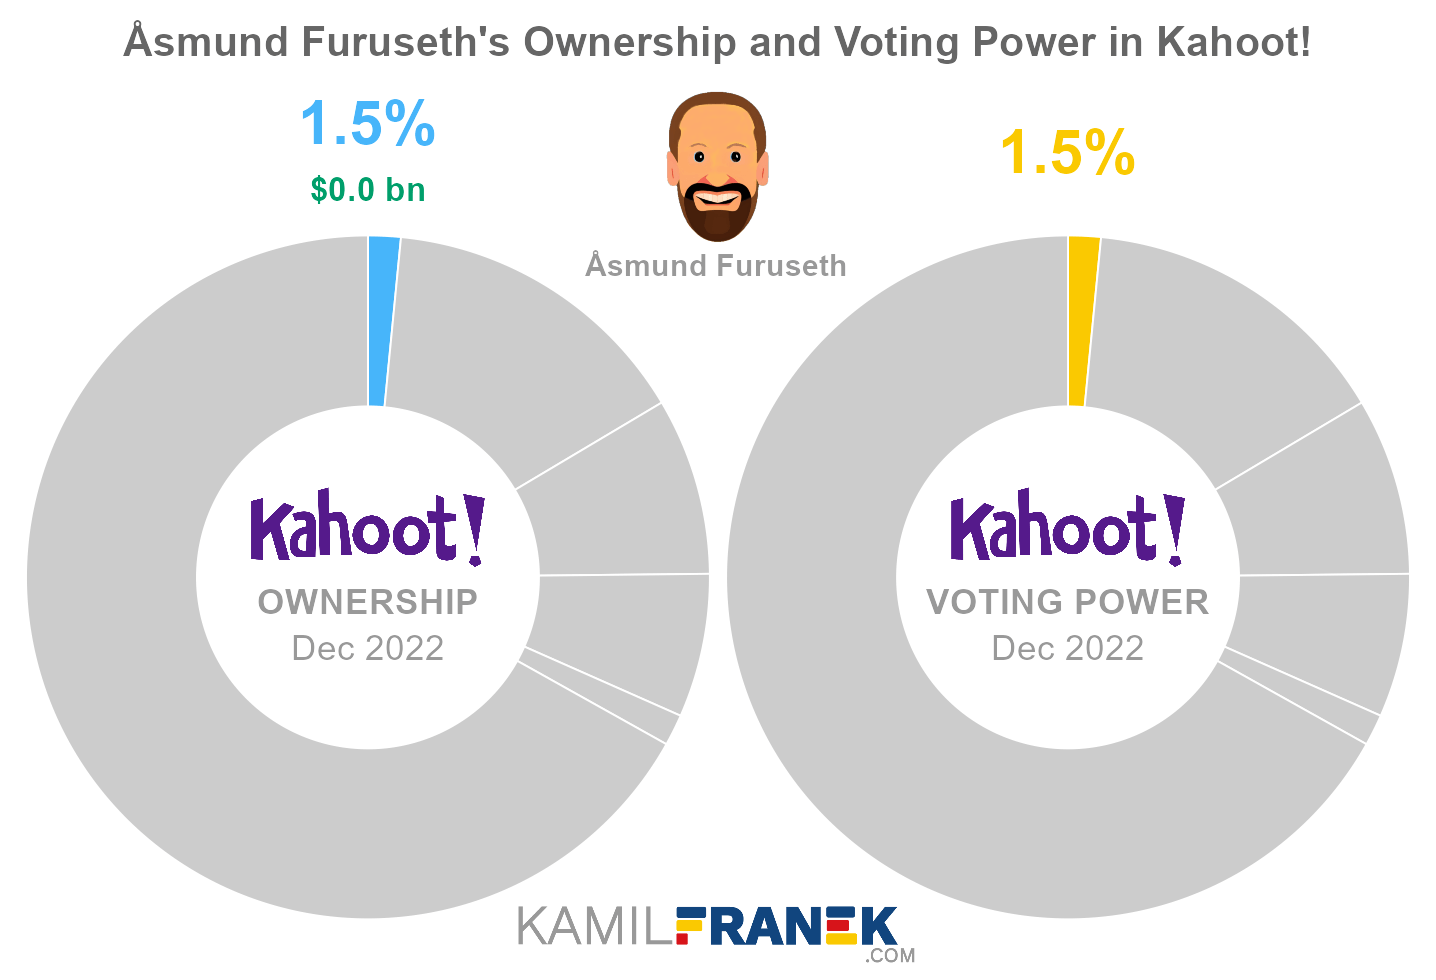 Åsmund Furuseth's share ownership and voting power in Kahoot! (chart)